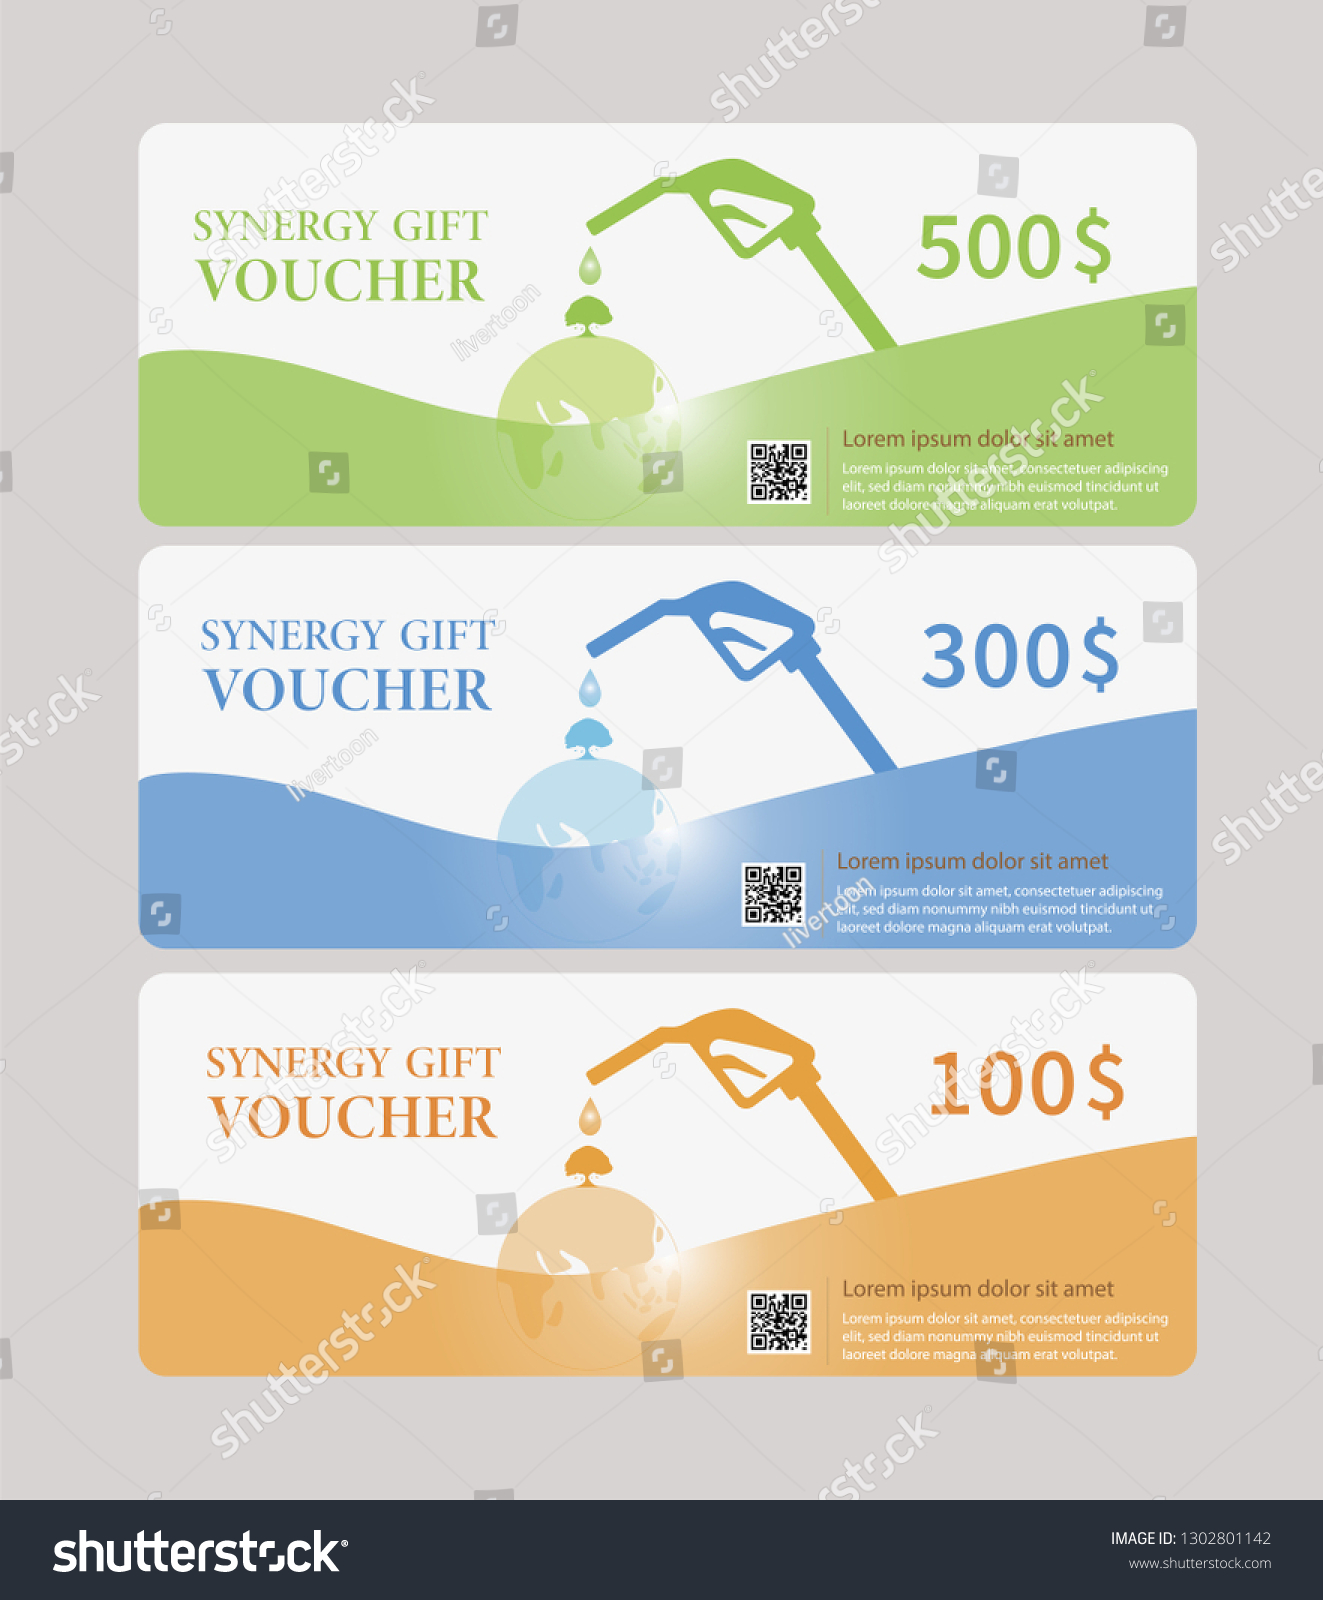 SVG of Synergy Gift Voucher template clean and clear collection with QR code.Vector illustration. Set of Three difference colors. Green for 500$, Blue for 300$ and Orange for 100$. svg